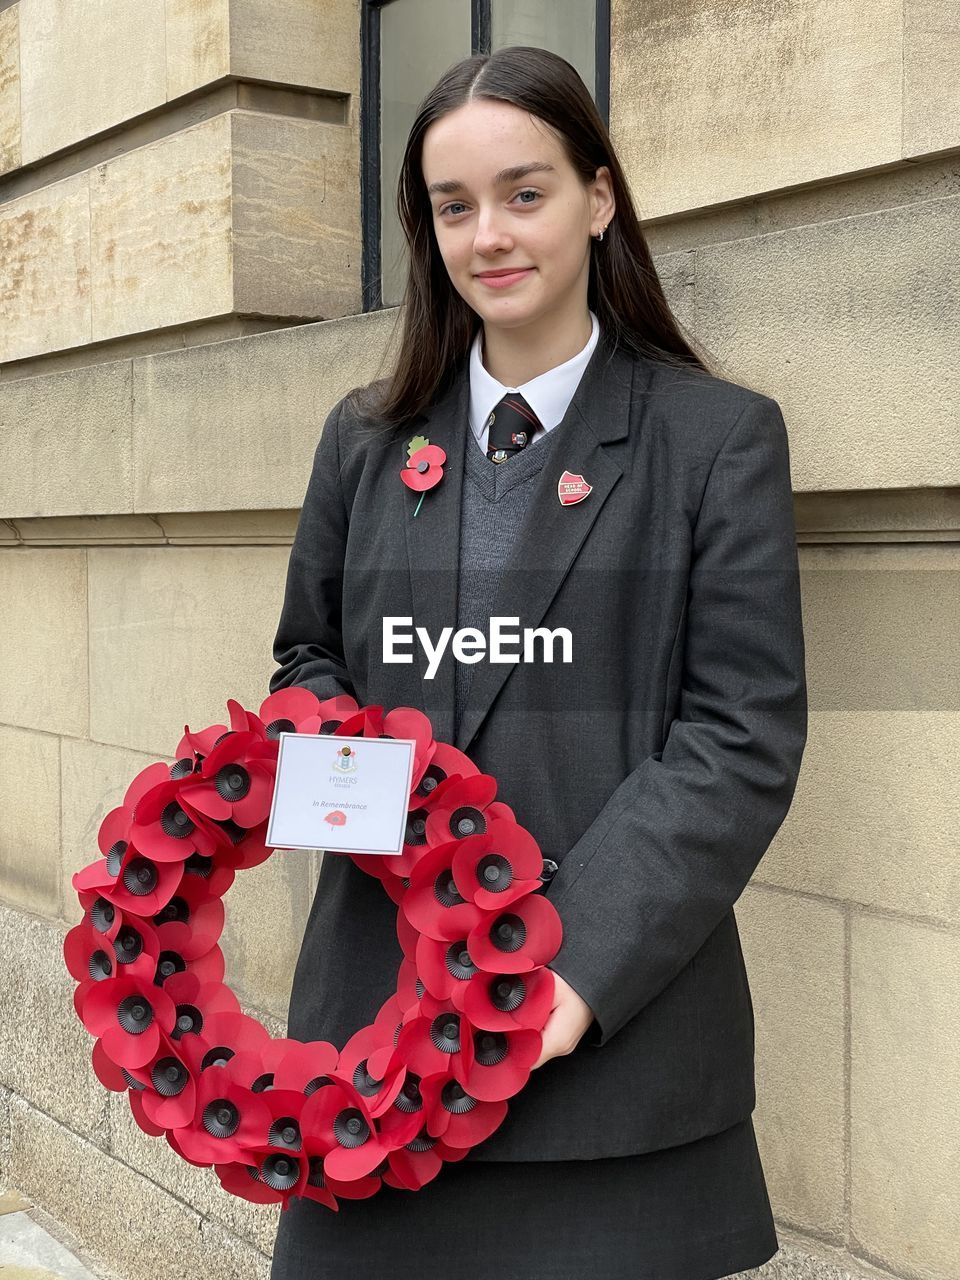 Sixth form girl student in school uniform with poppy wreath to lay at remembrance sunday service 